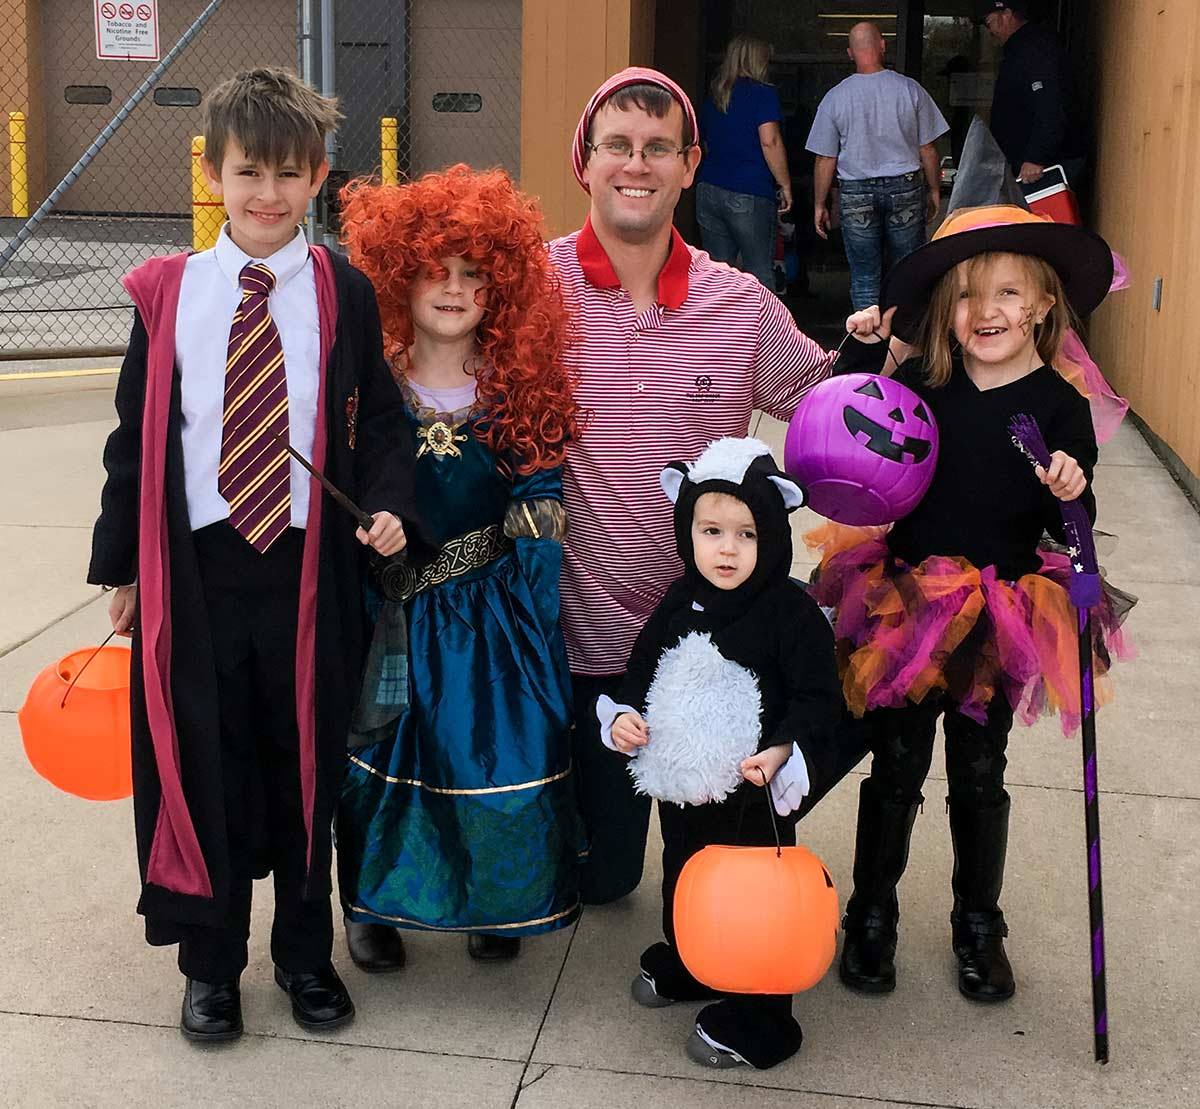 Teed family children (with their father) in Halloween costumes ranging from Harry Potter to an animal to a witch. They hold pumpkin baskets for candy. It's daylight and they are outside of a building.